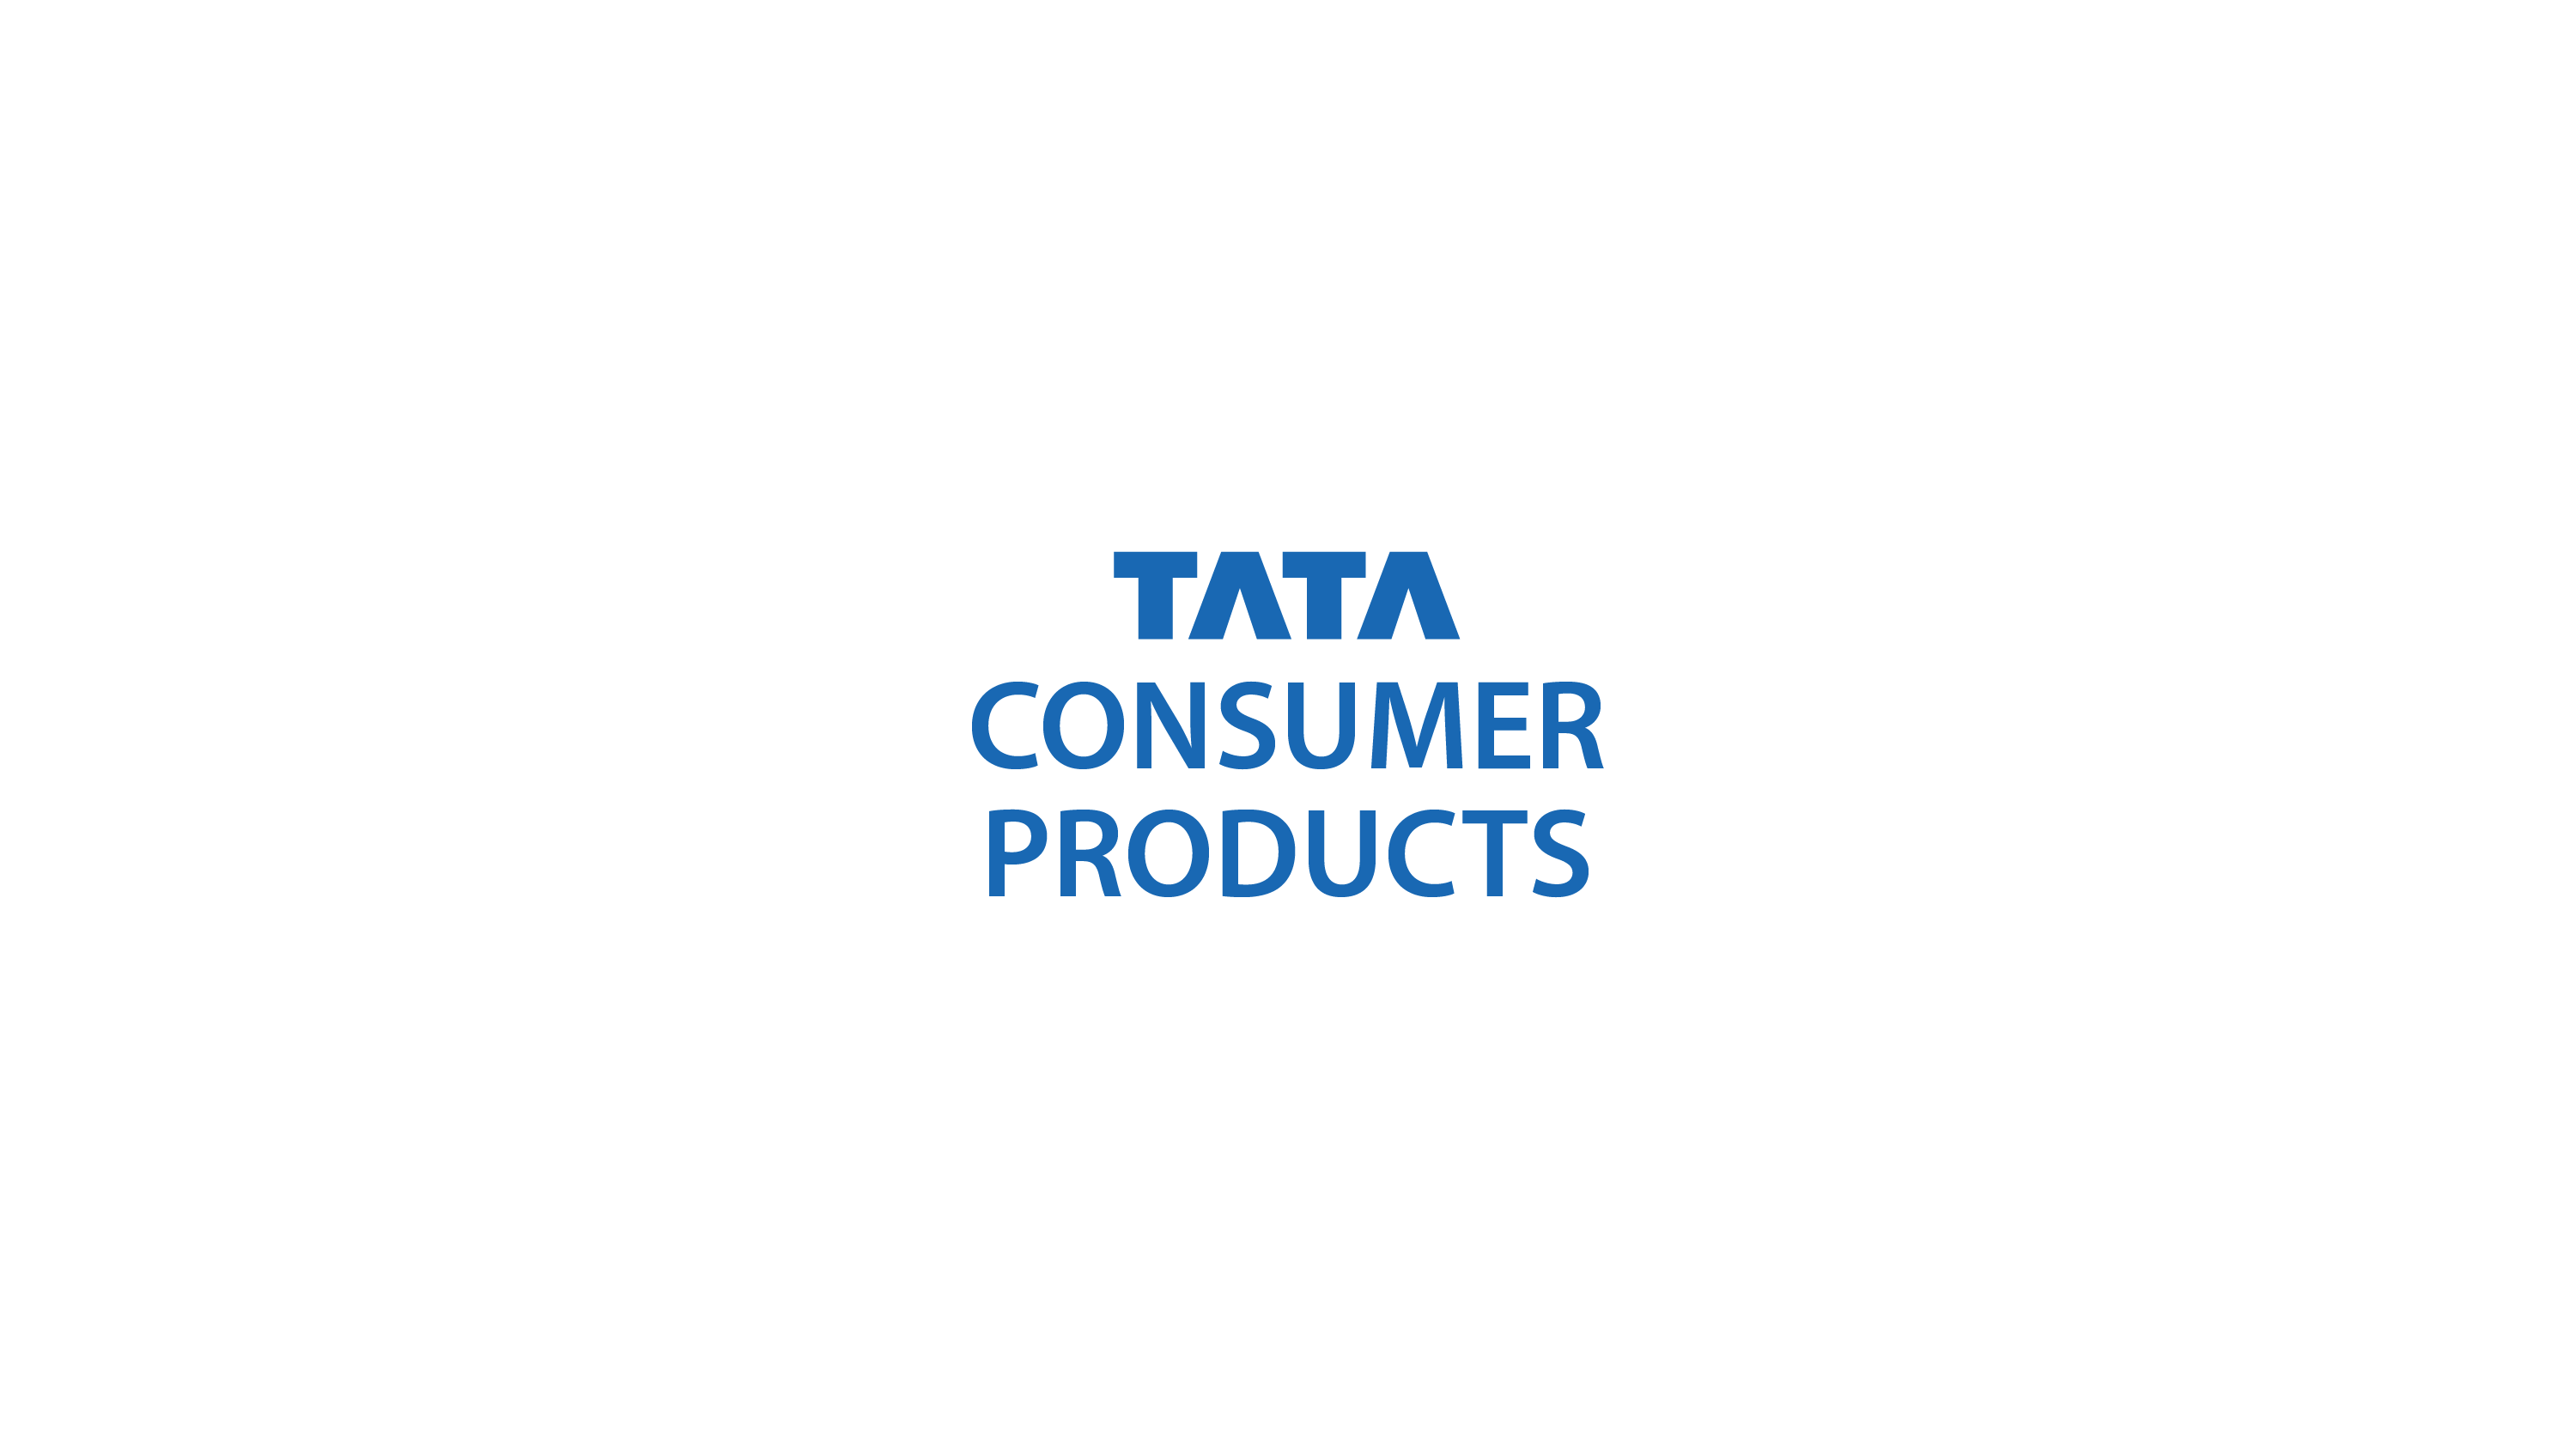 200120_TATA_CONSUMER_PRODUCTS_BLUE_S-01